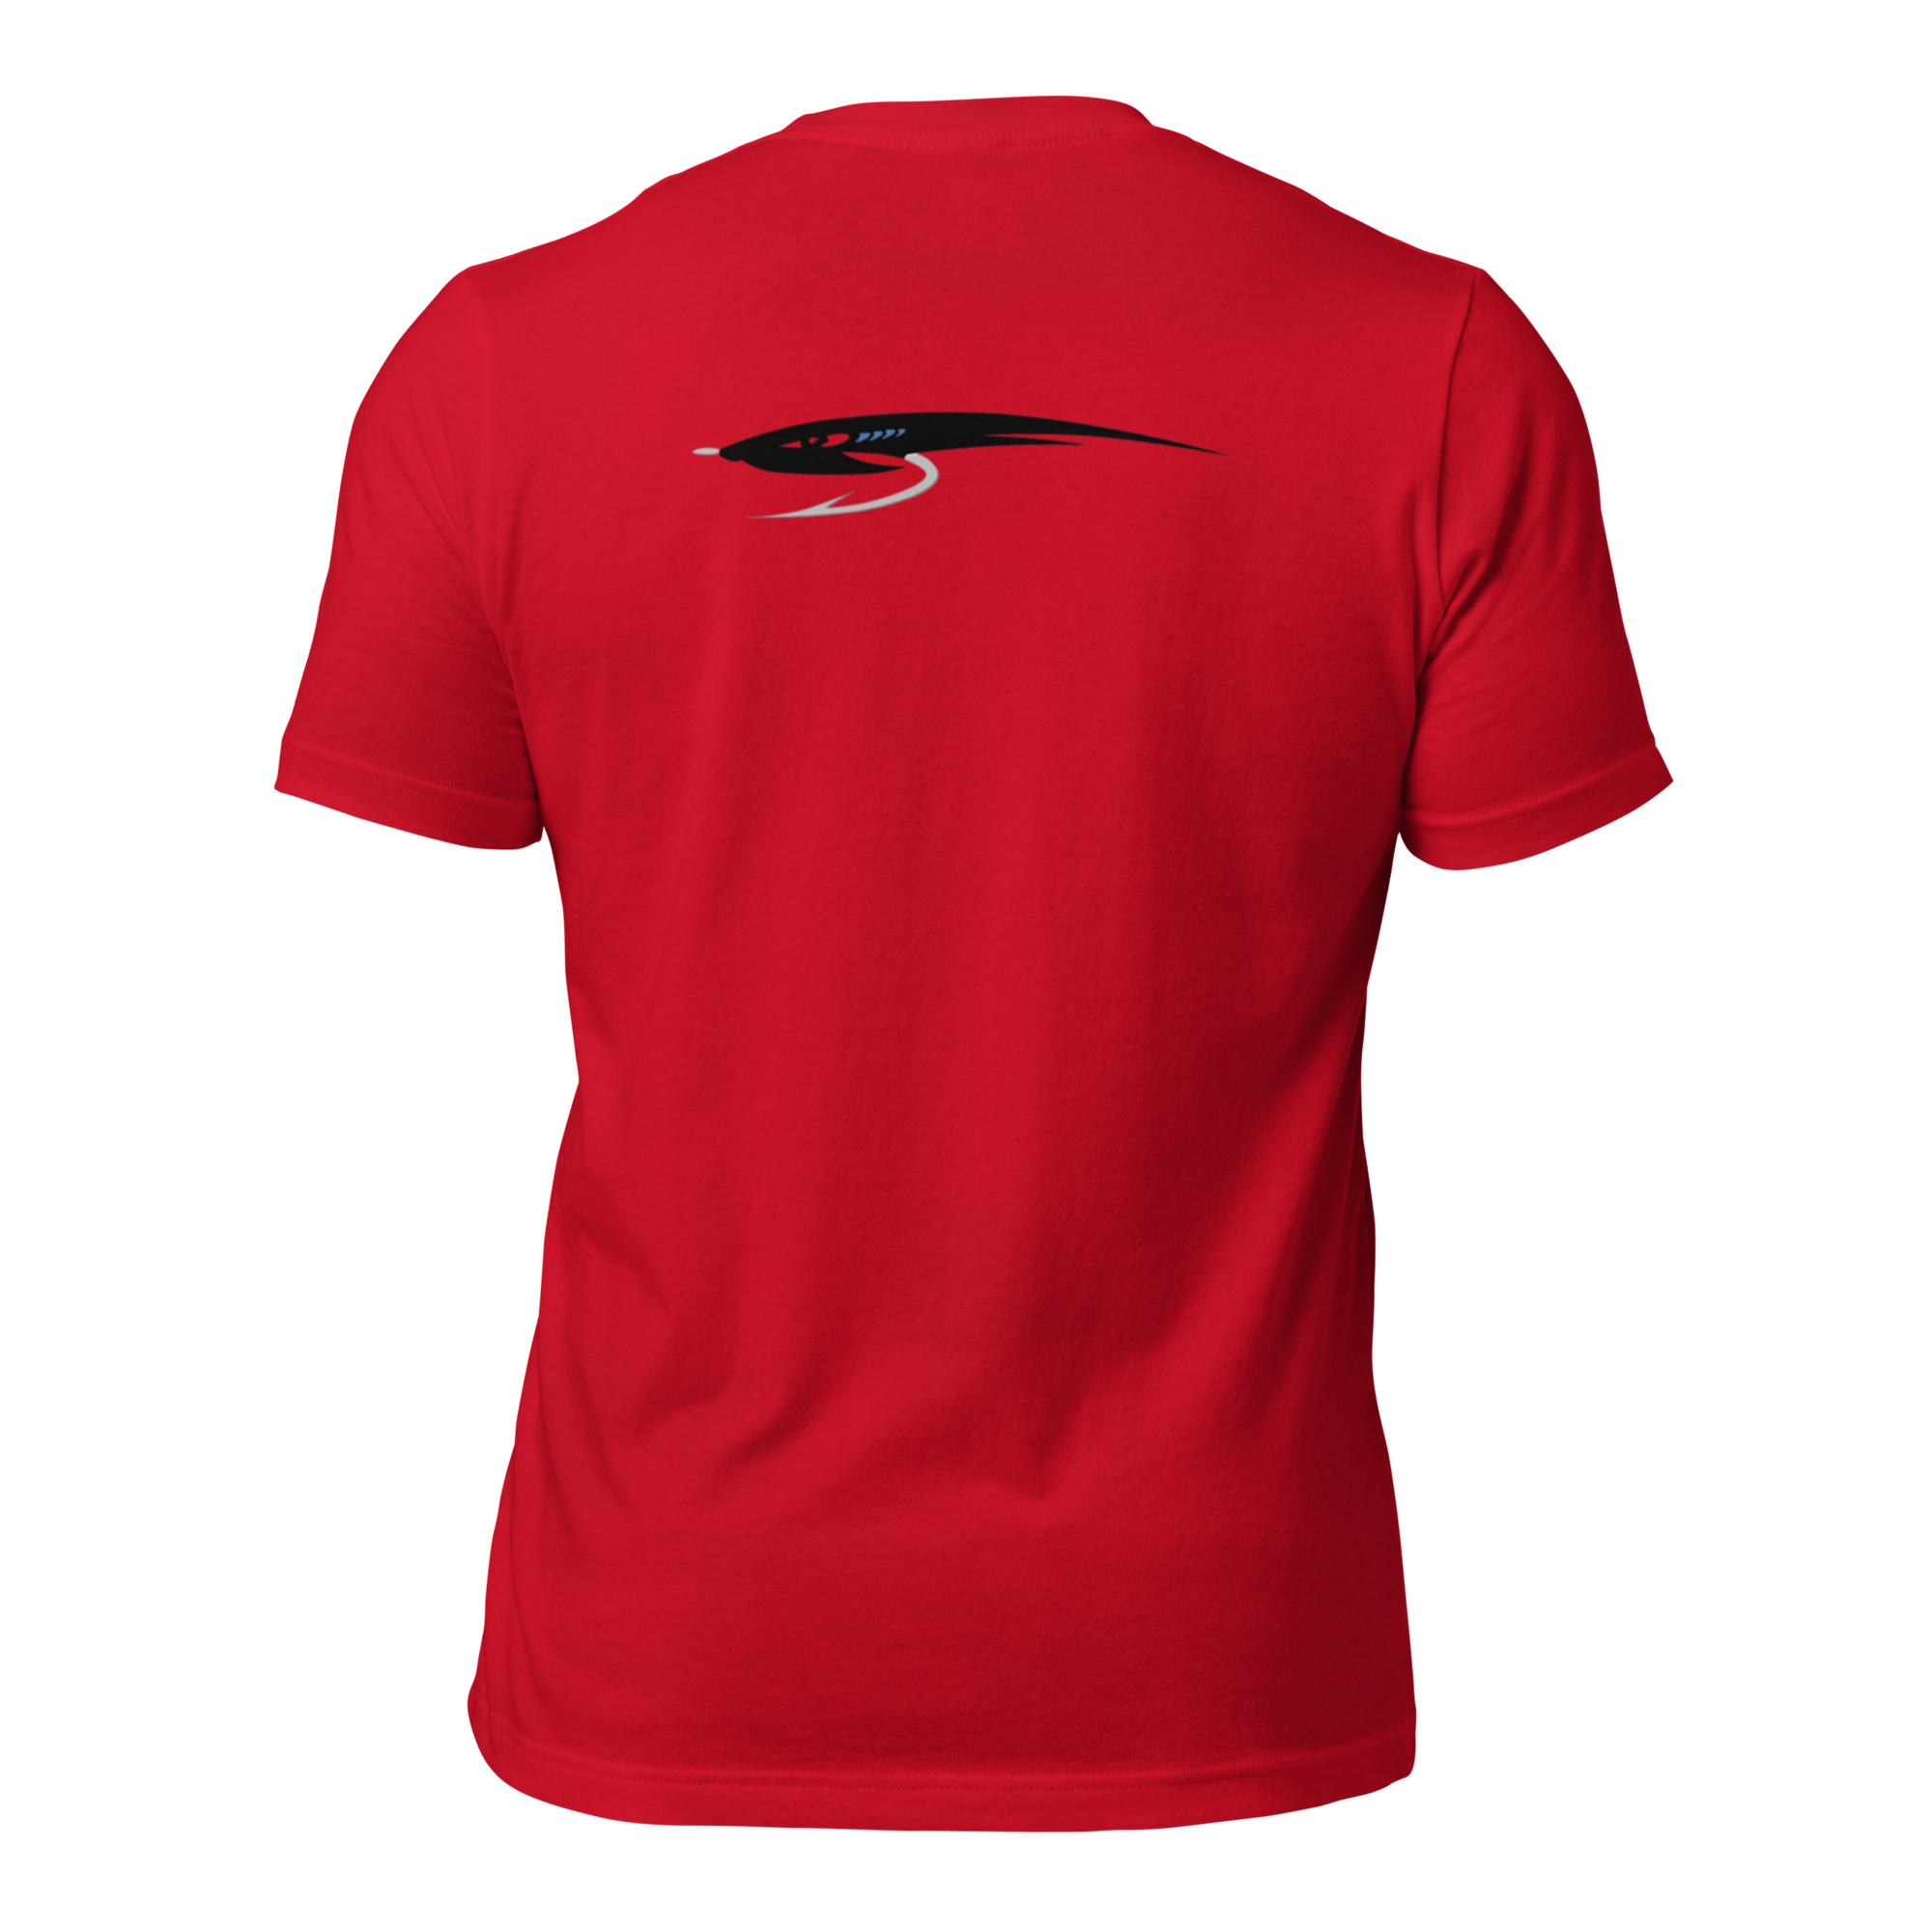 unisex-staple-t-shirt-red-back-653fc8c04f6a6_0290c291-6bc9-4acf-a7be-aa6e07d9ac91.png